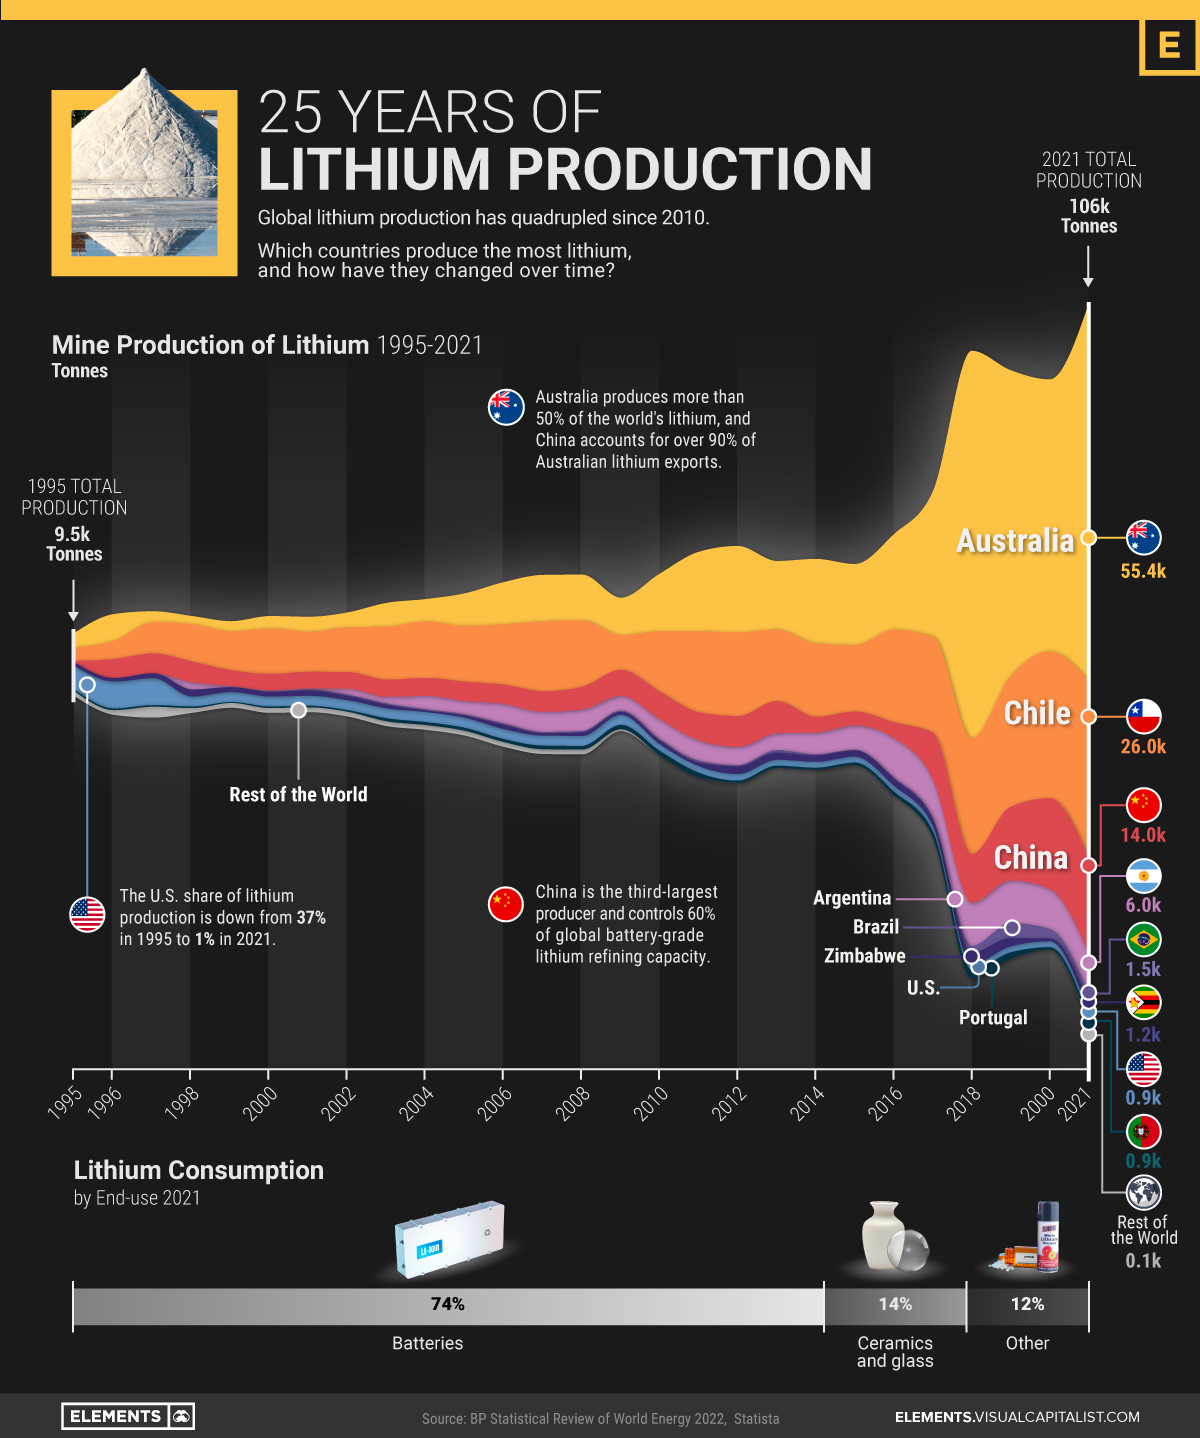 Visualizing 25 Years of Lithium Production, by Country